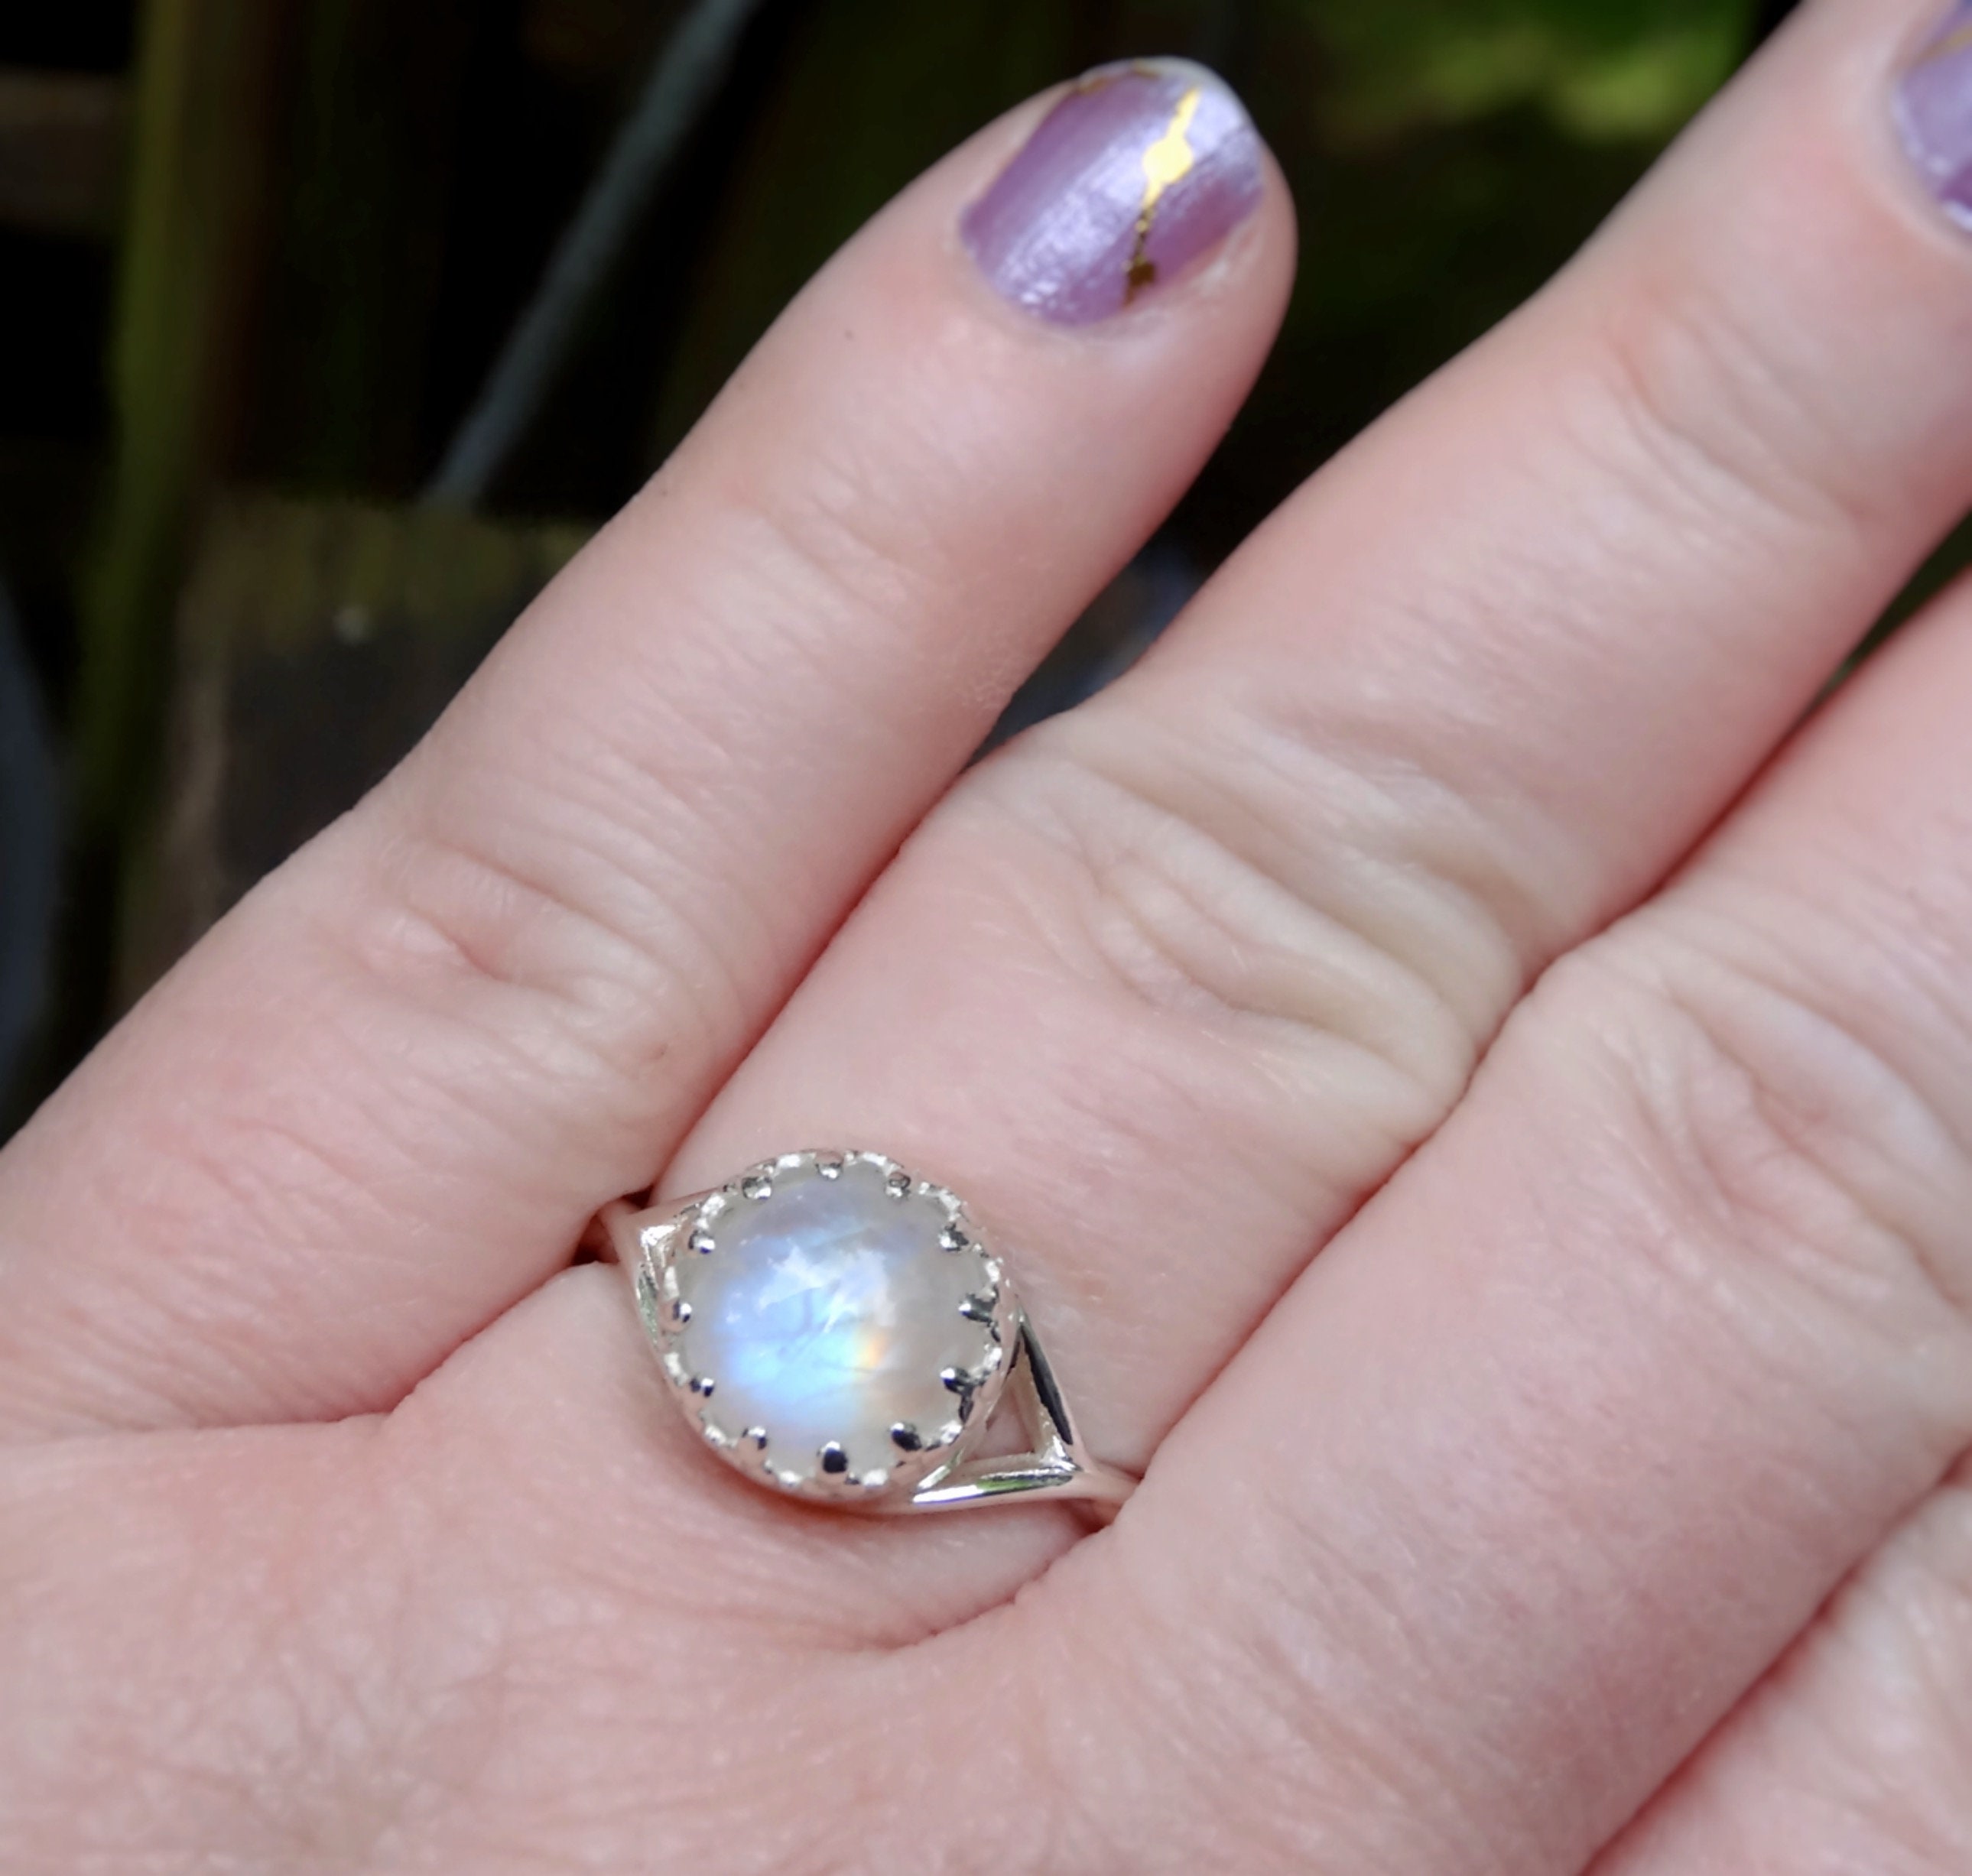 Are Diamonds Out? The Latest Obsession with Moonstone Rings